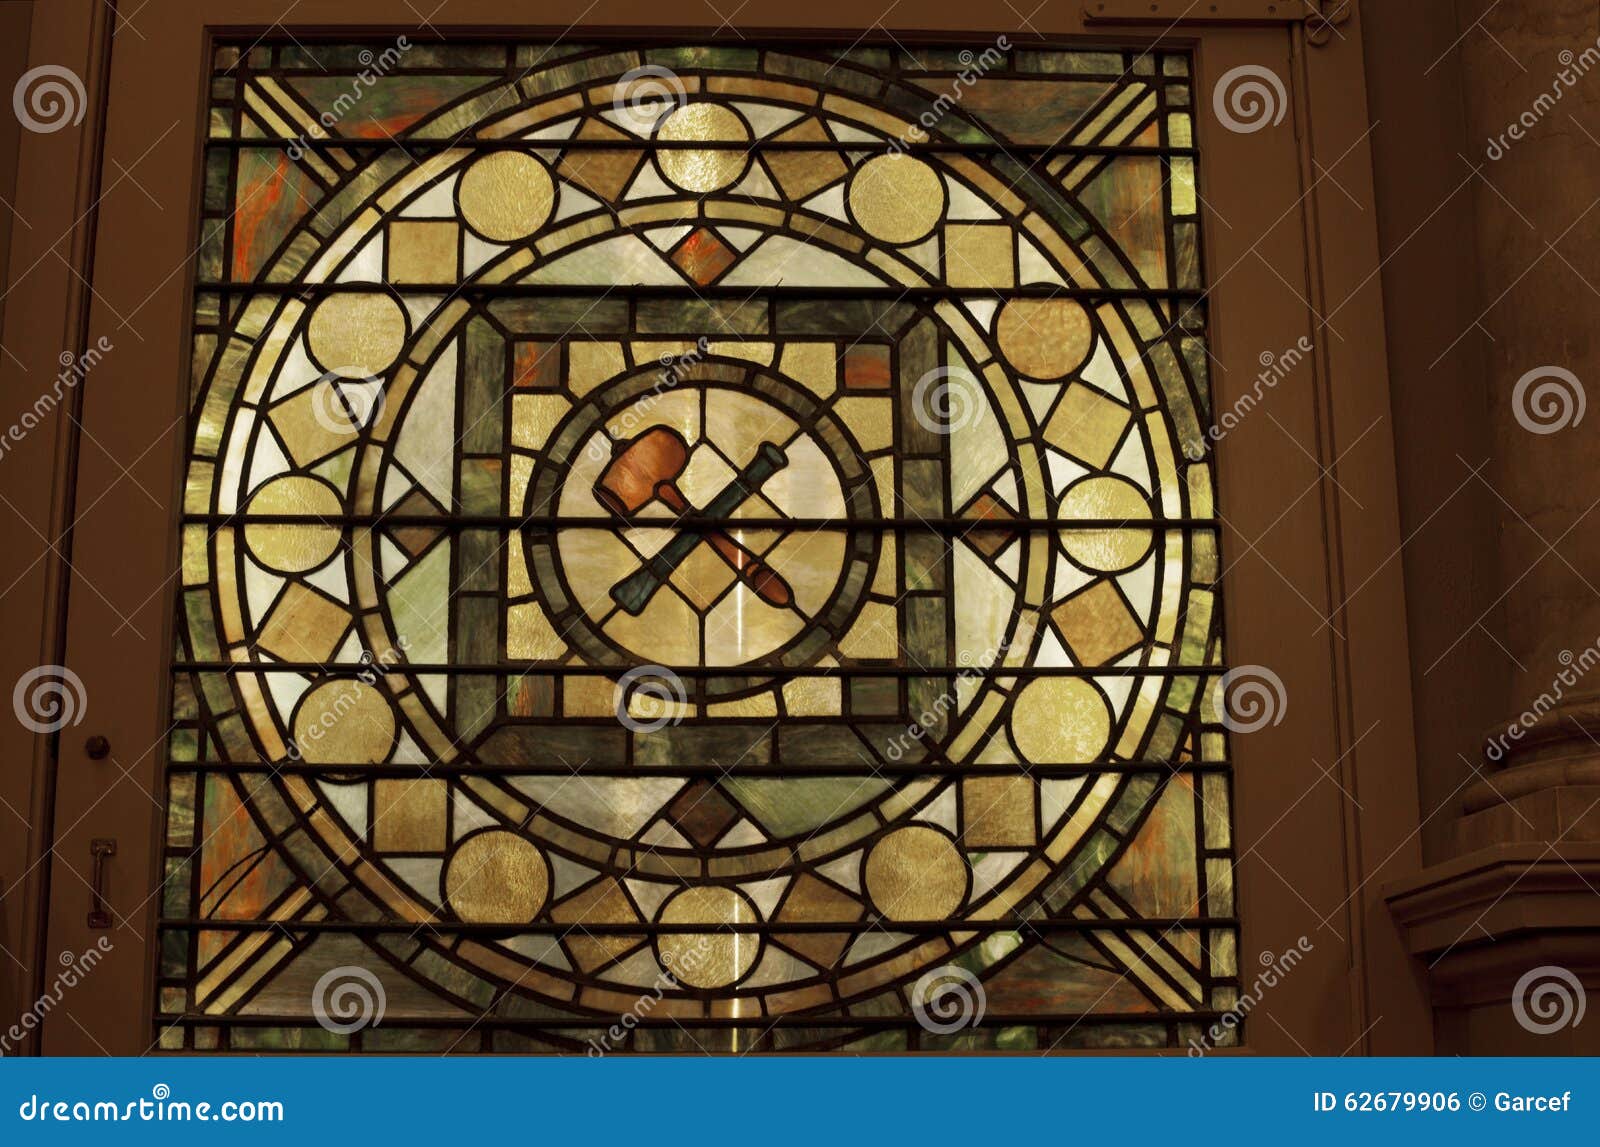 Stained glass at the Masonic Temple